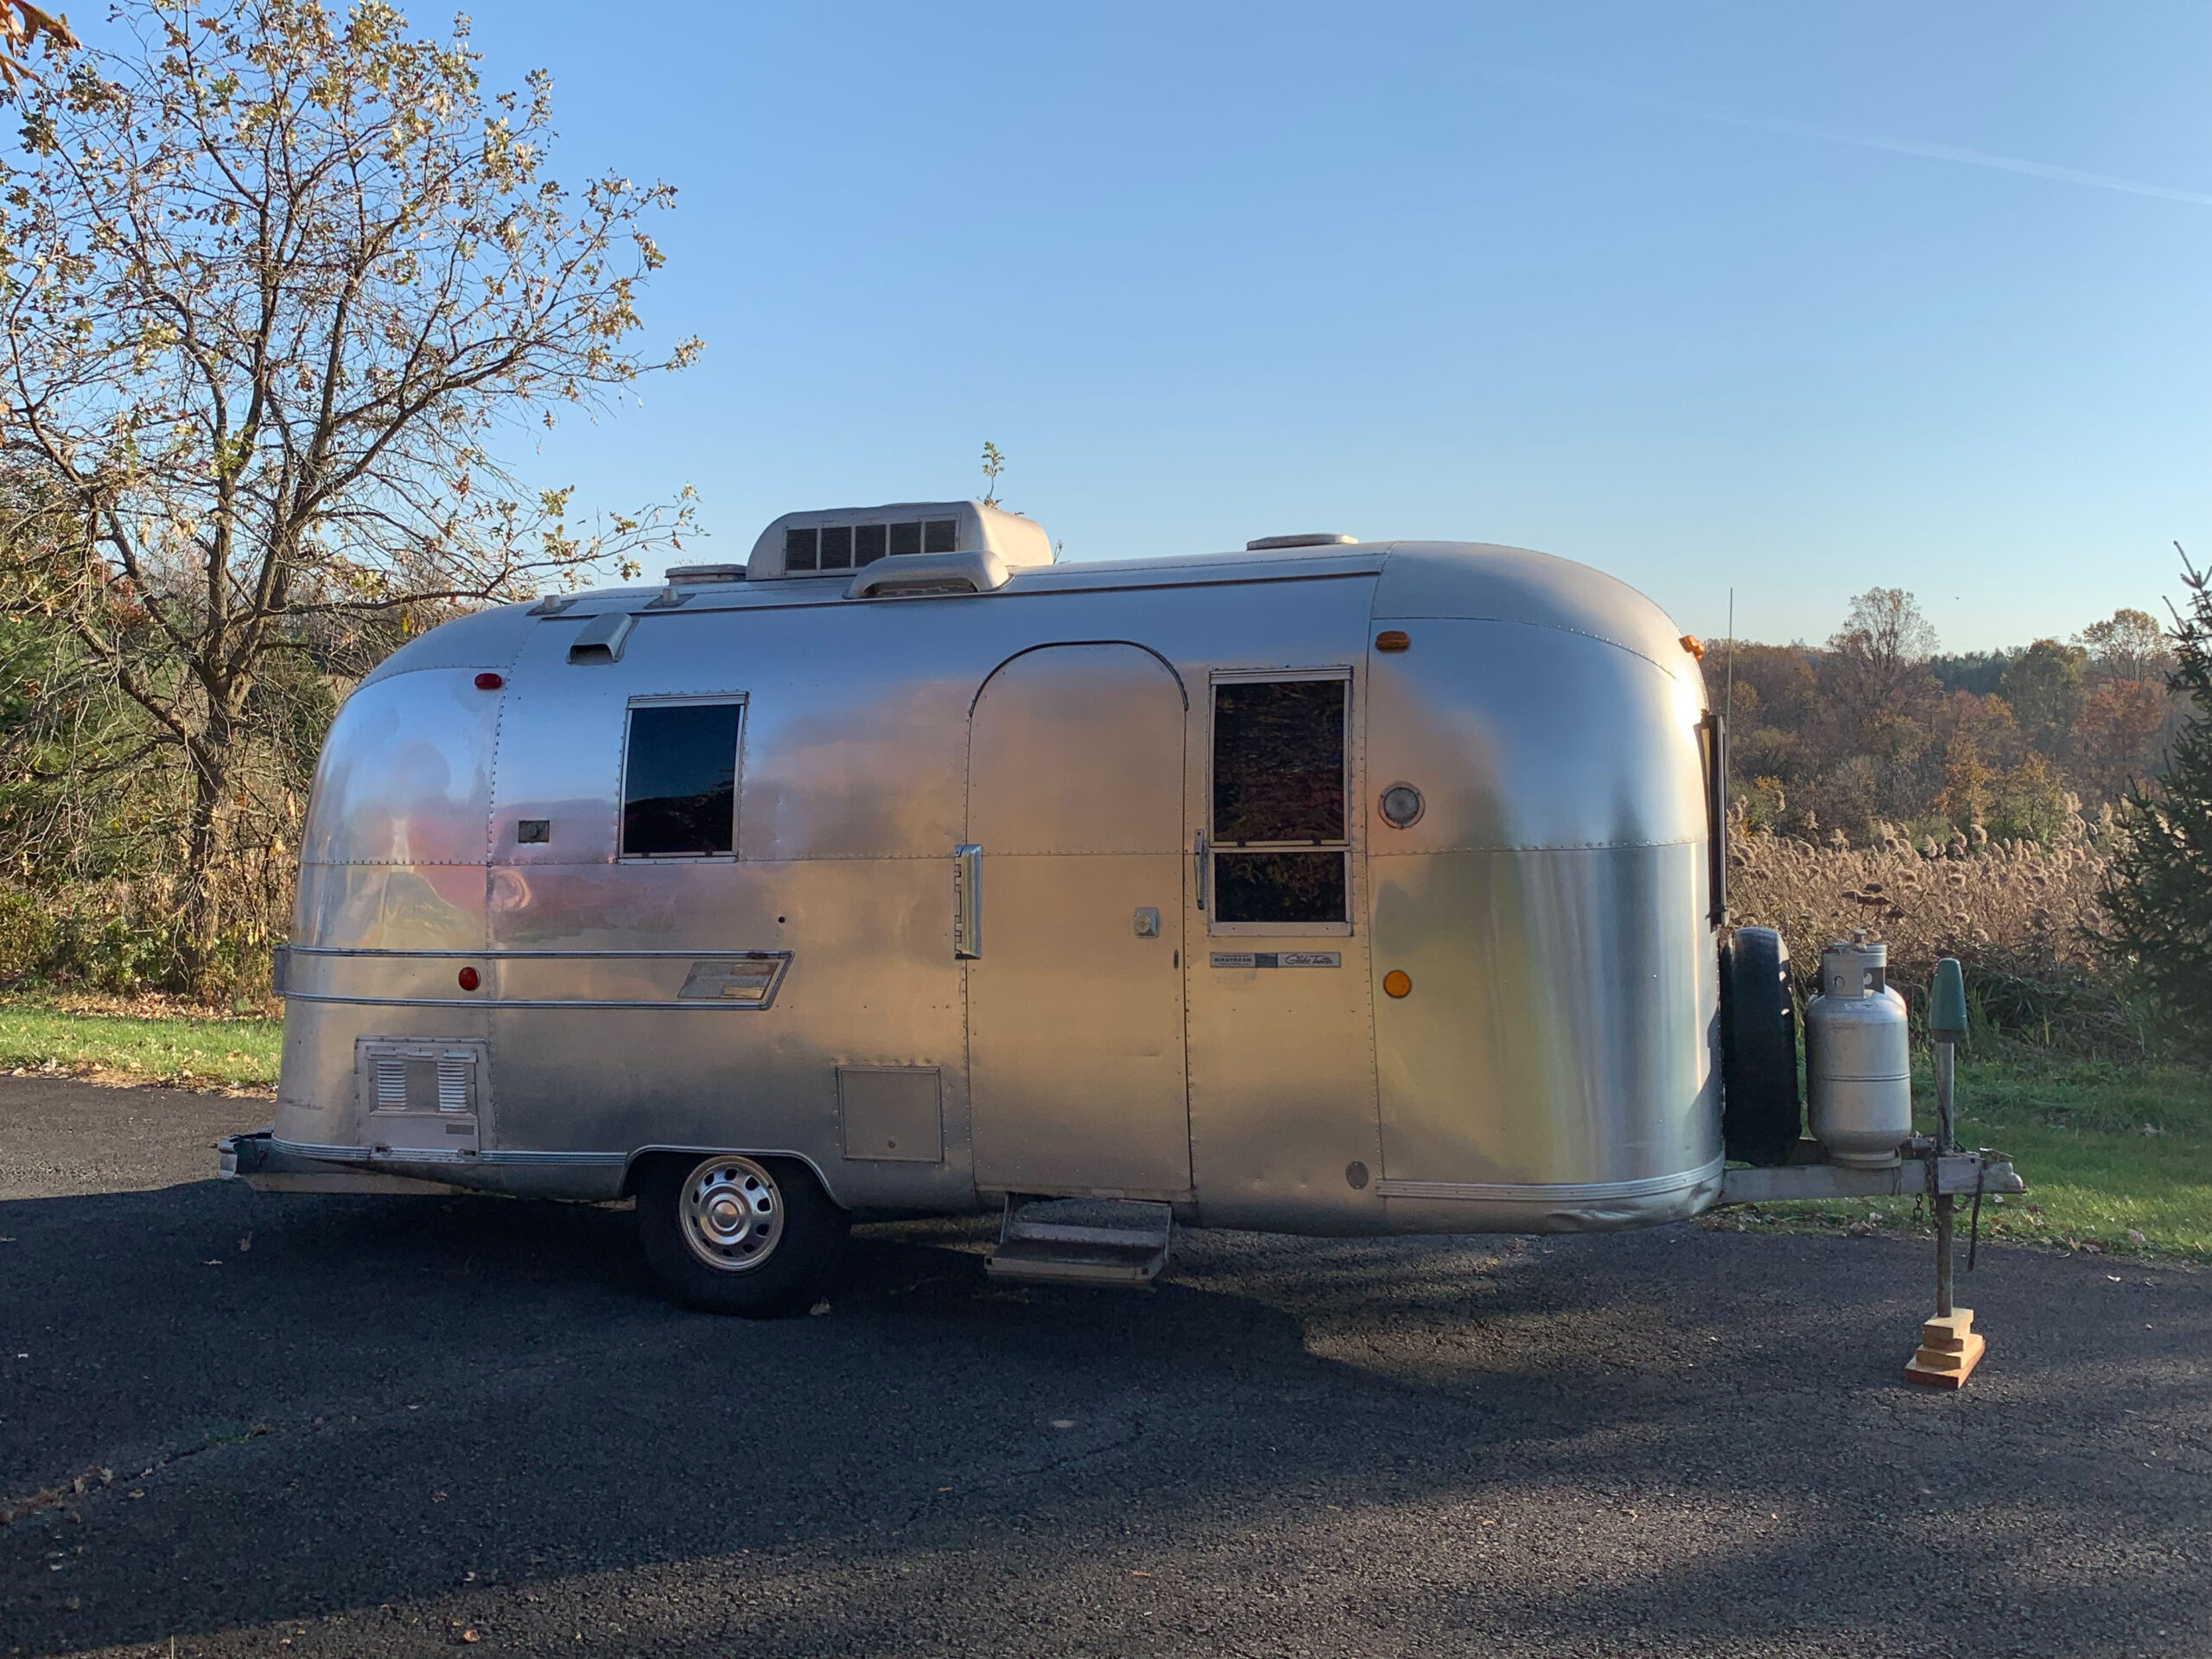 Time Capsule For Sale: A Vintage 1968 Airstream Globetrotter